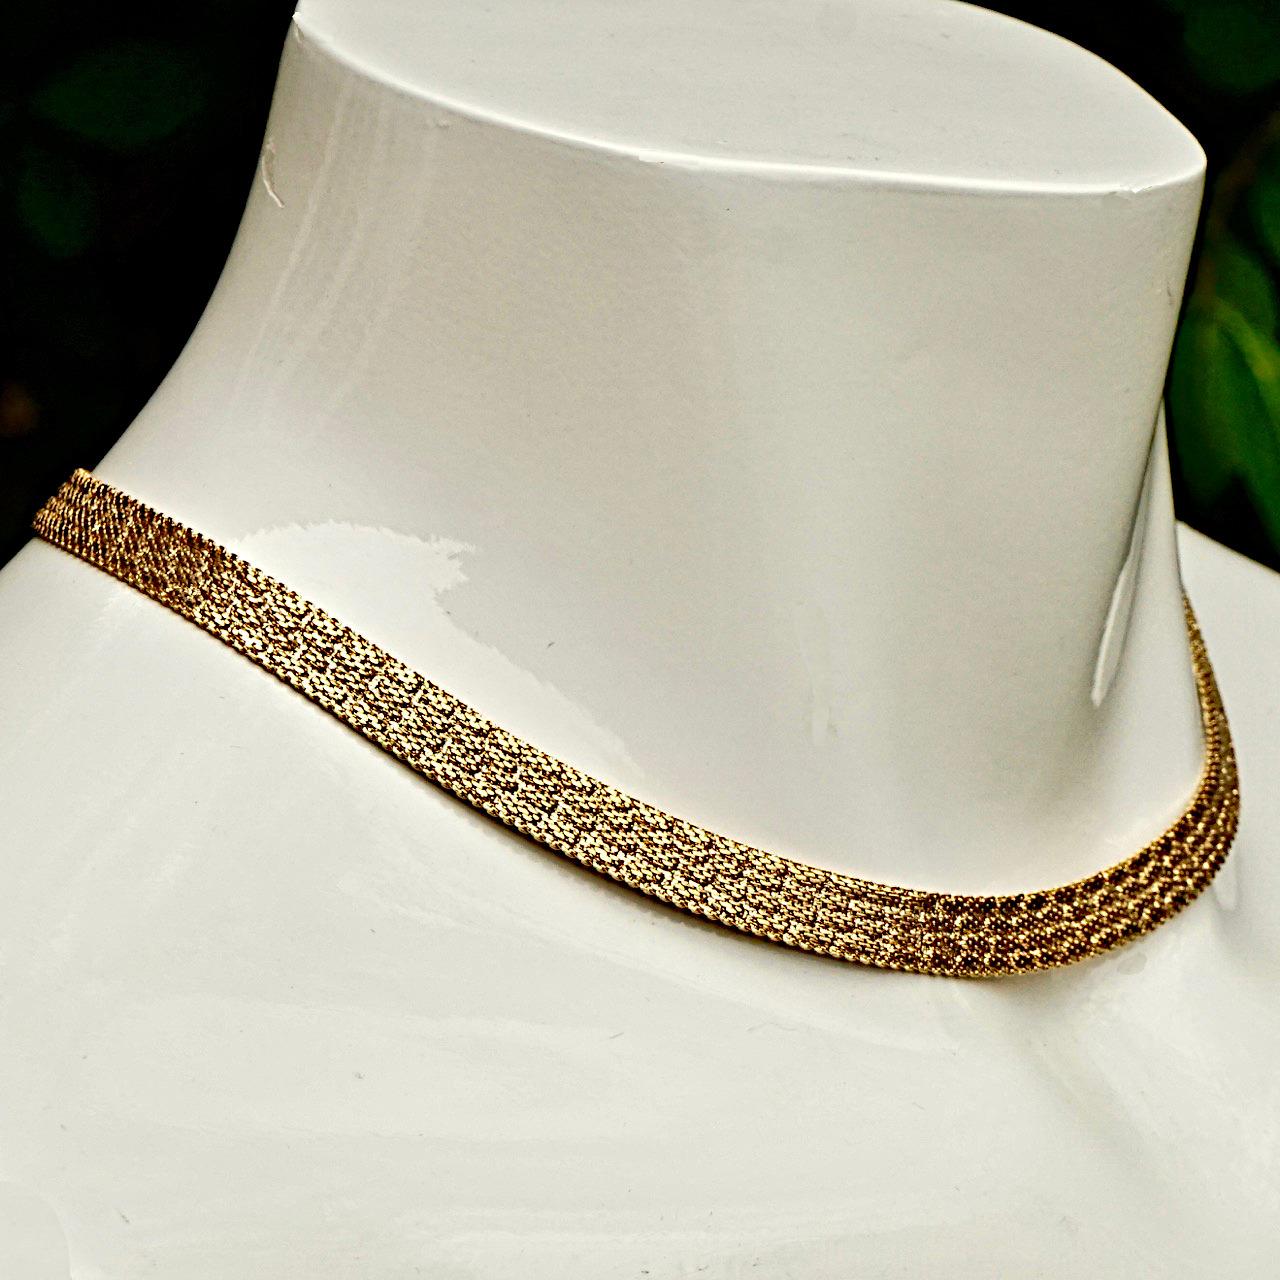 Gold Plated Textured Design Mesh Collar Necklace circa 1980s In Excellent Condition For Sale In London, GB